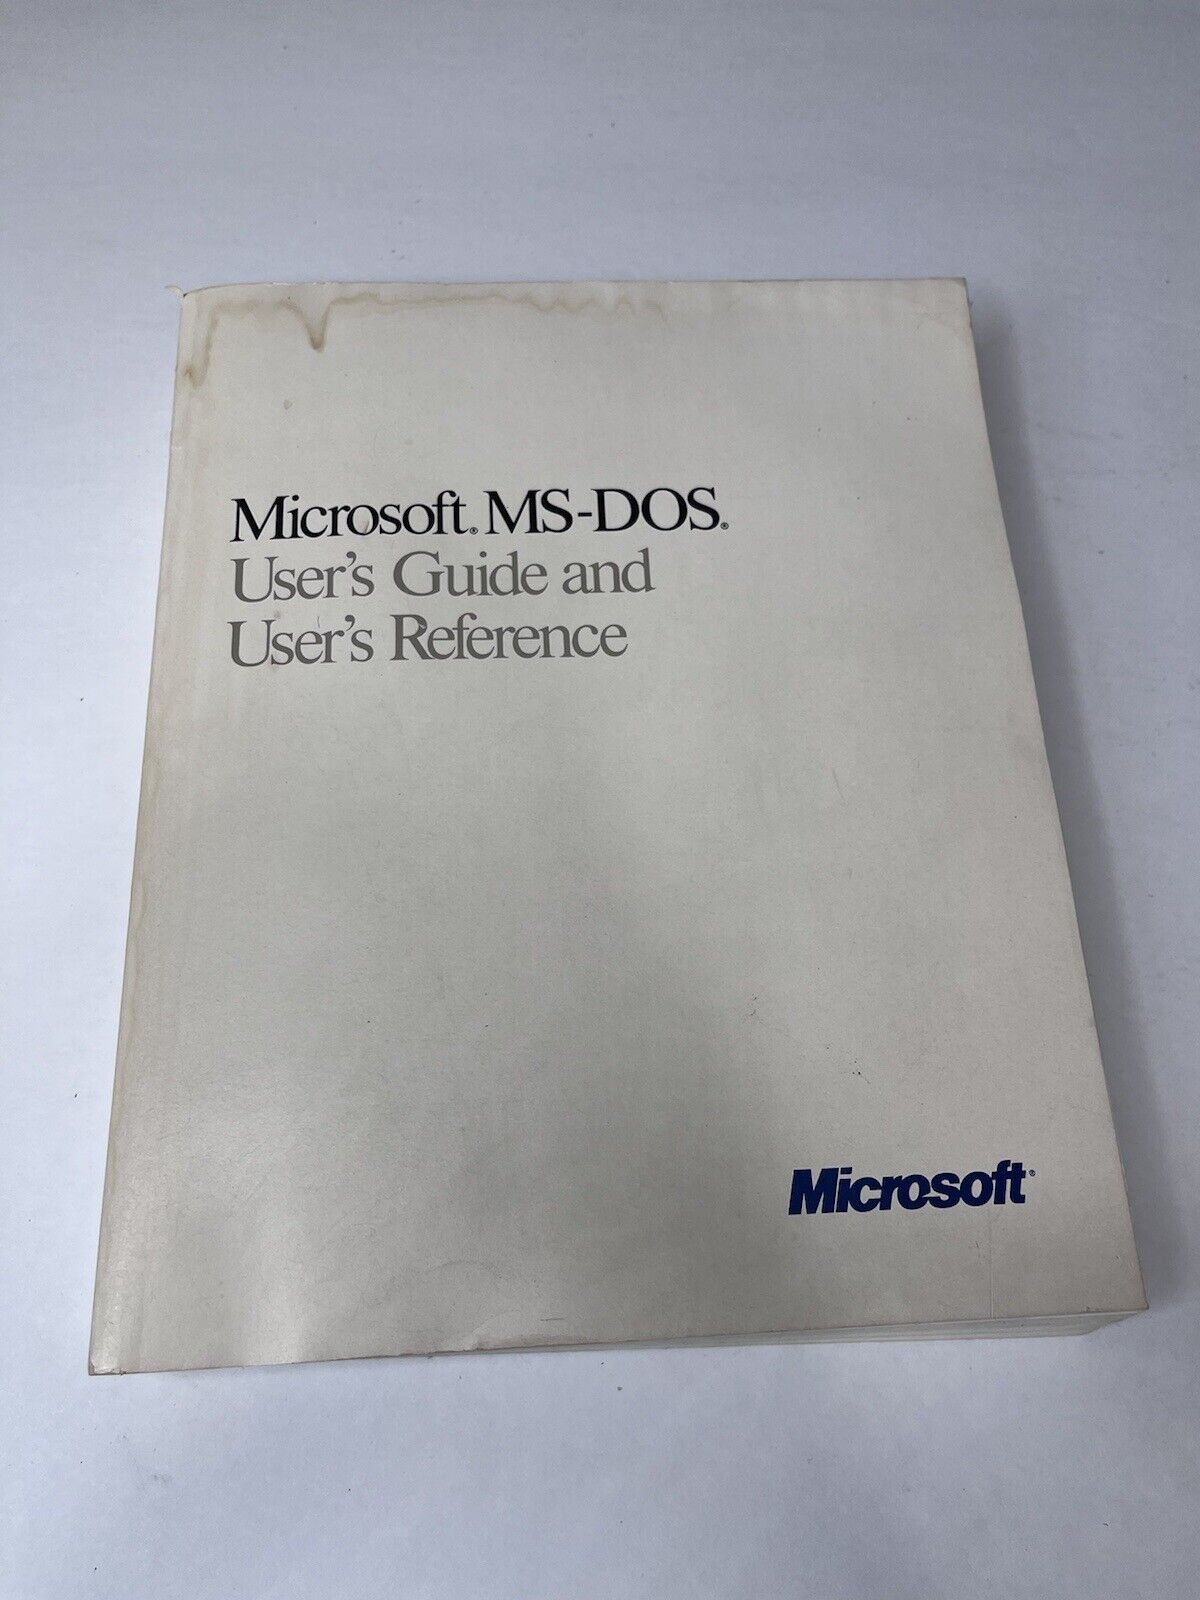 Microsoft MS-DOS User's Guide and User's Reference Version 4.0 Copyright '87-'88